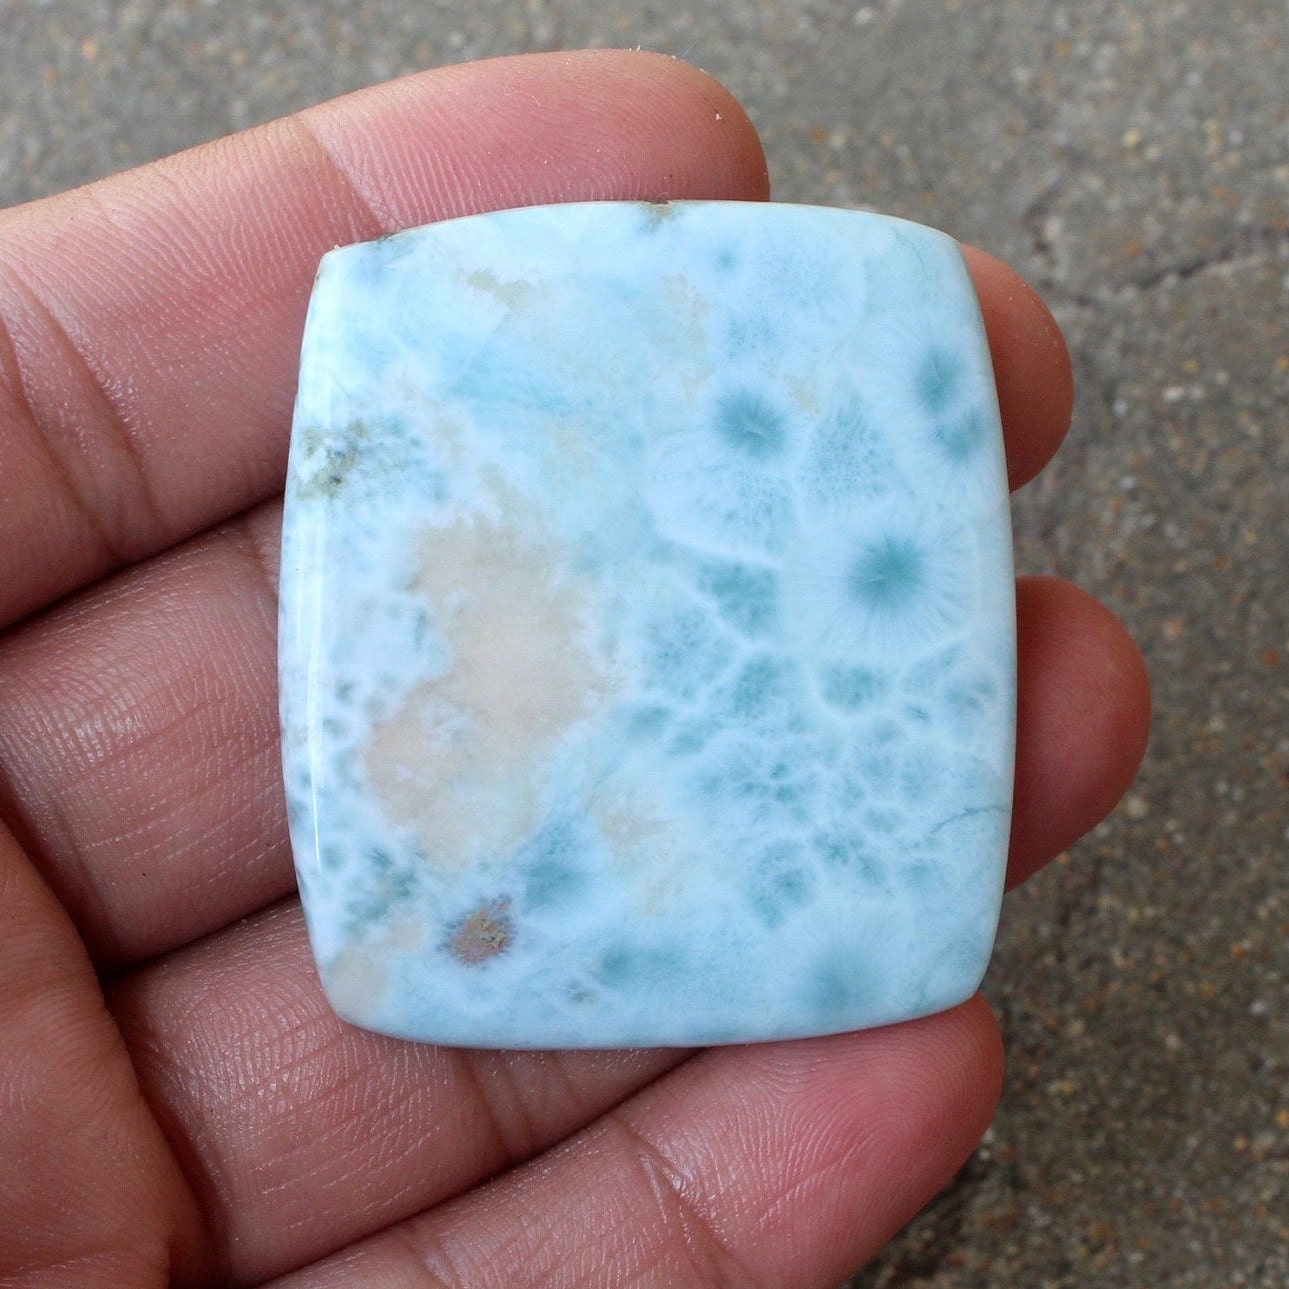 Superb Natural Larimar Stone Wire Wrapping Jewelry Making Birth Stone Healing Designer Larimar Cabochon Stone 33x23x5 MM,33.0 Cts